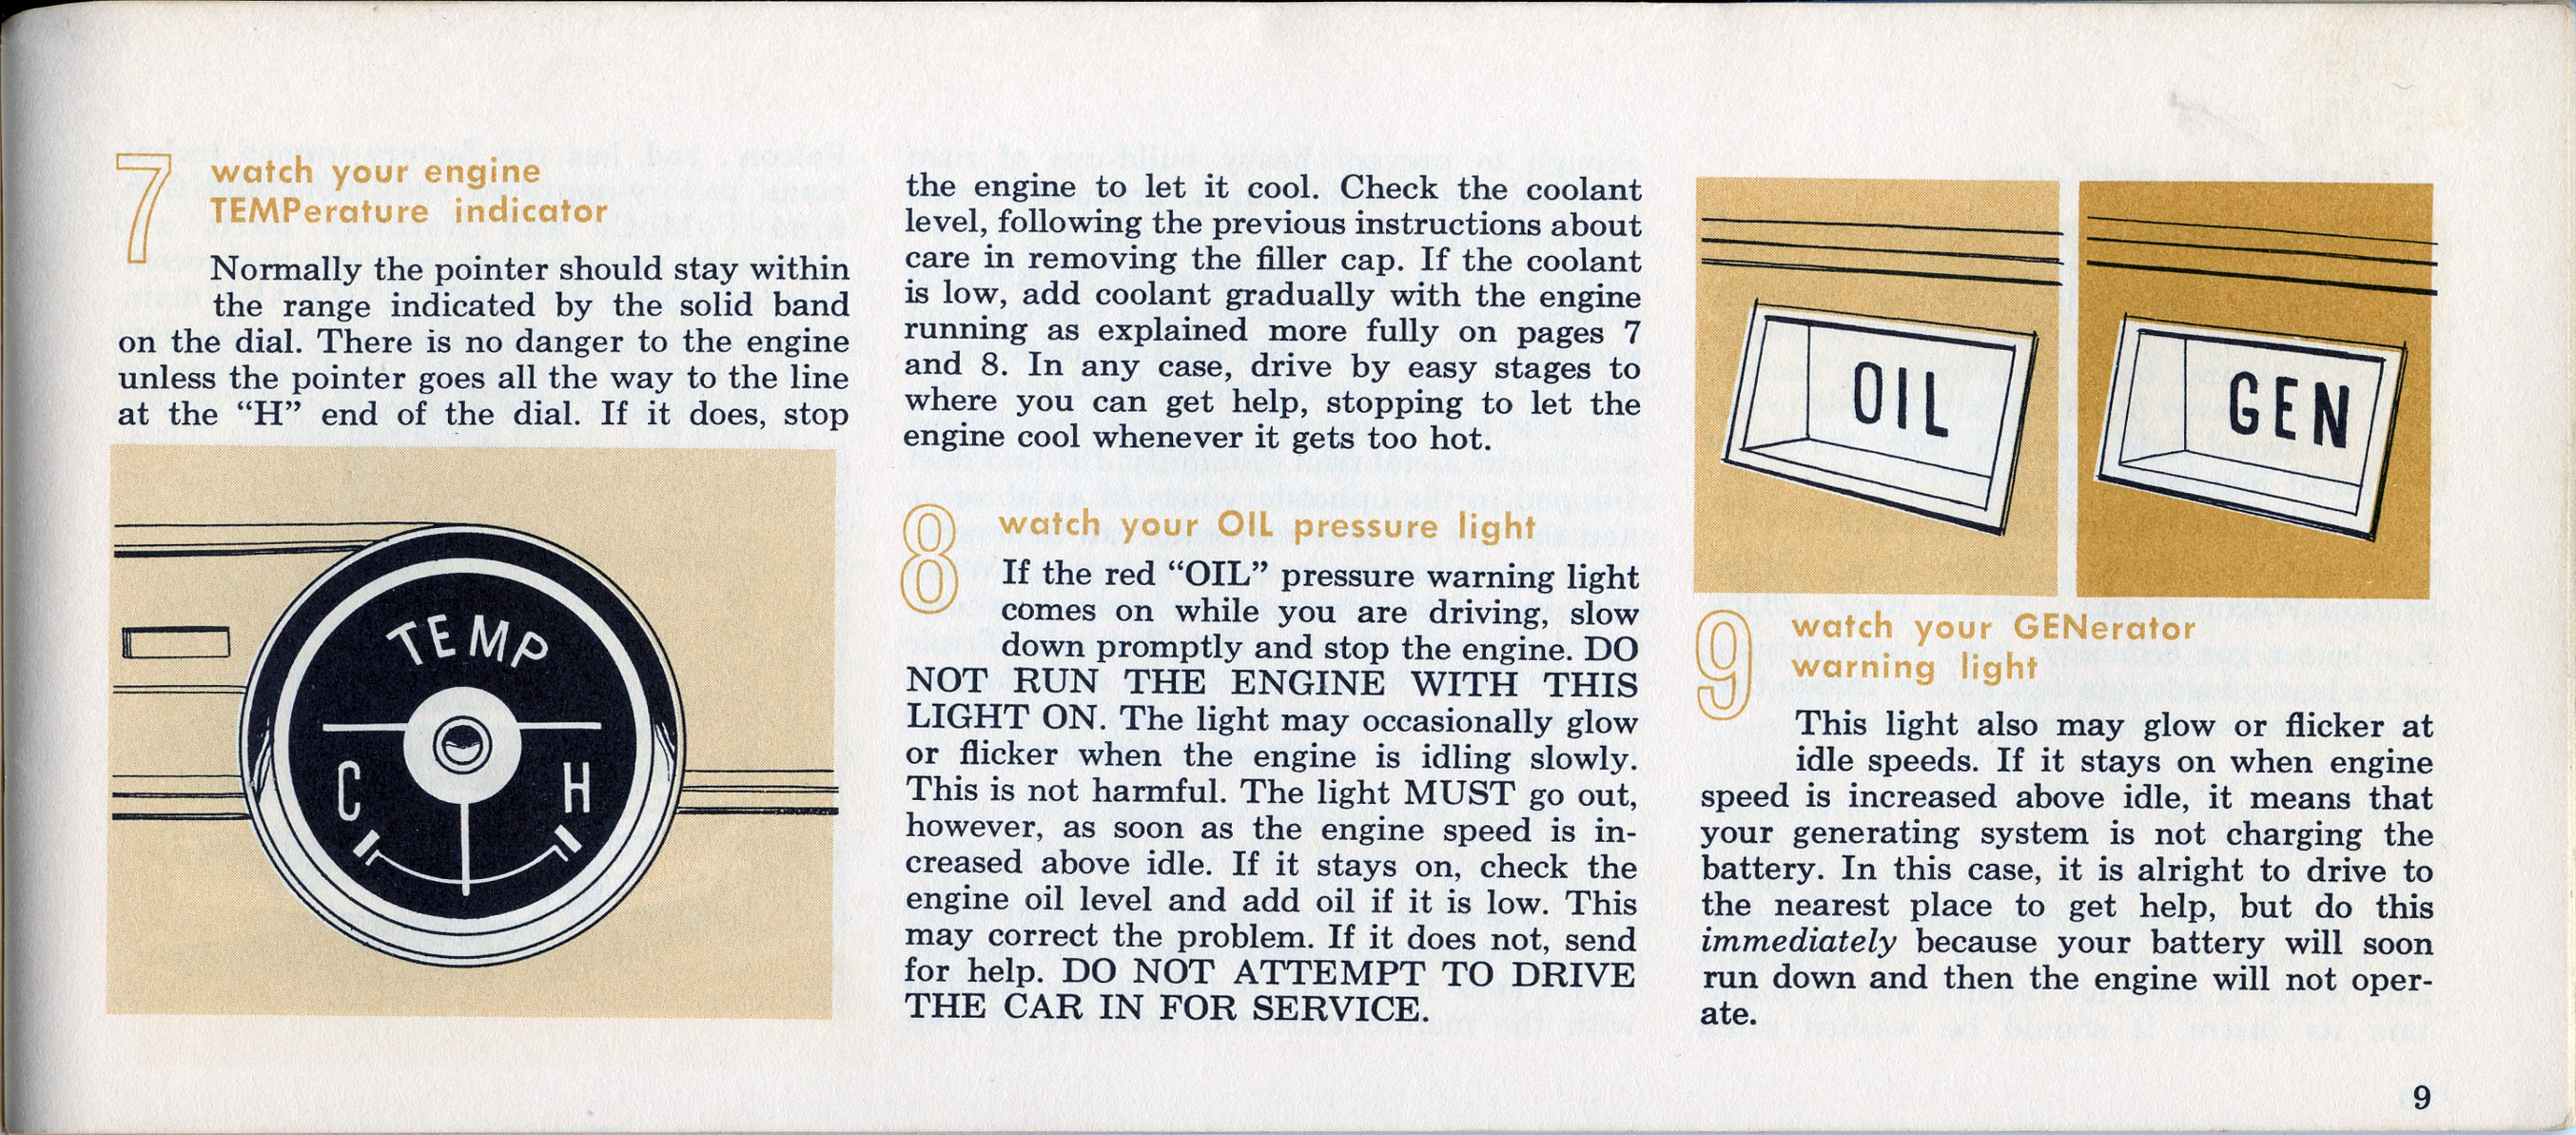 1964 Ford Falcon Owners Manual-09